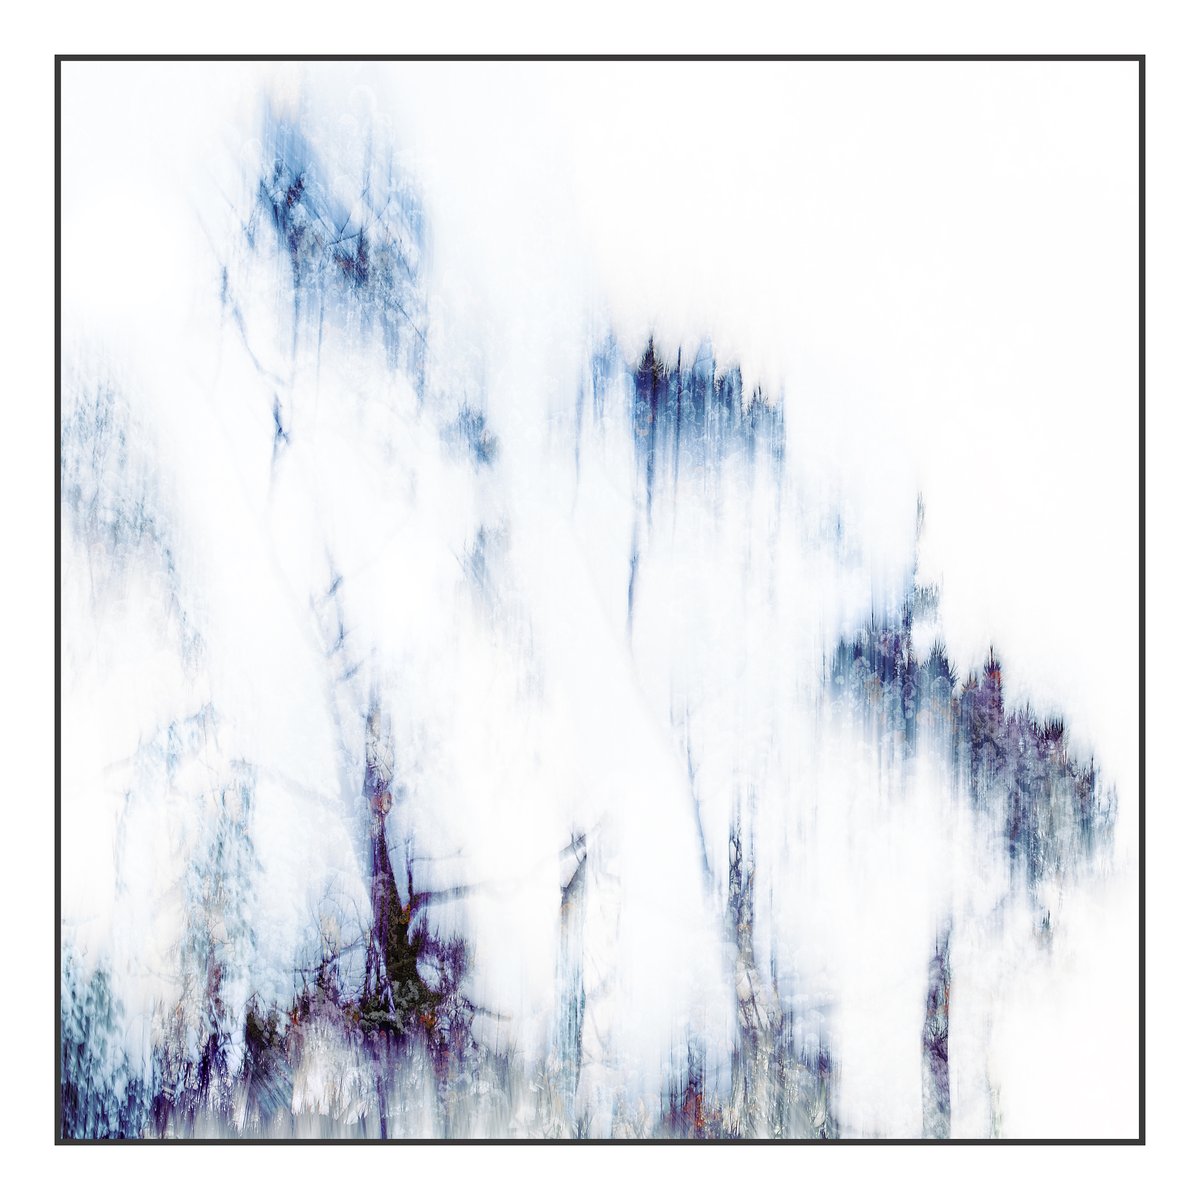 deliberate camera movement and deliberate over exposure in the quest of woodland abstracts #sharemondays2024 #fsprintmonday